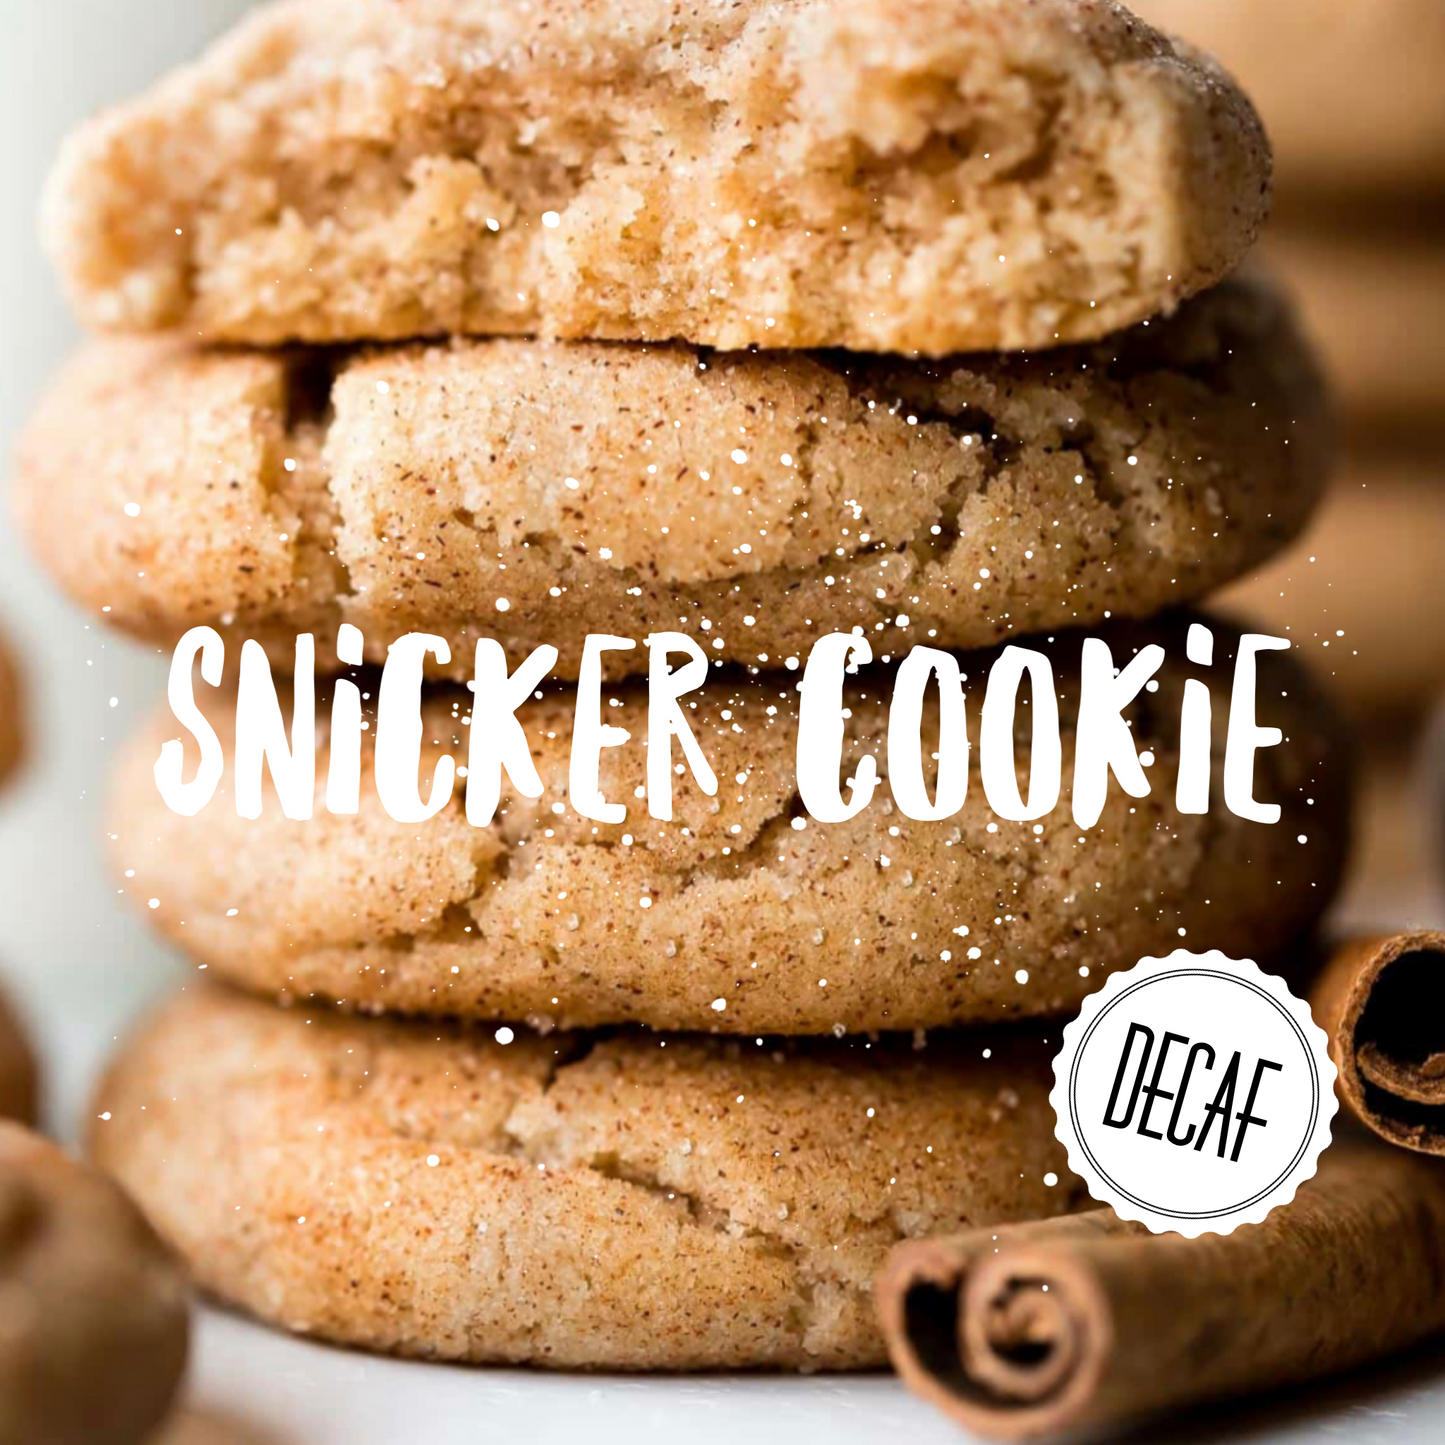 Snicker Cookie Decaf